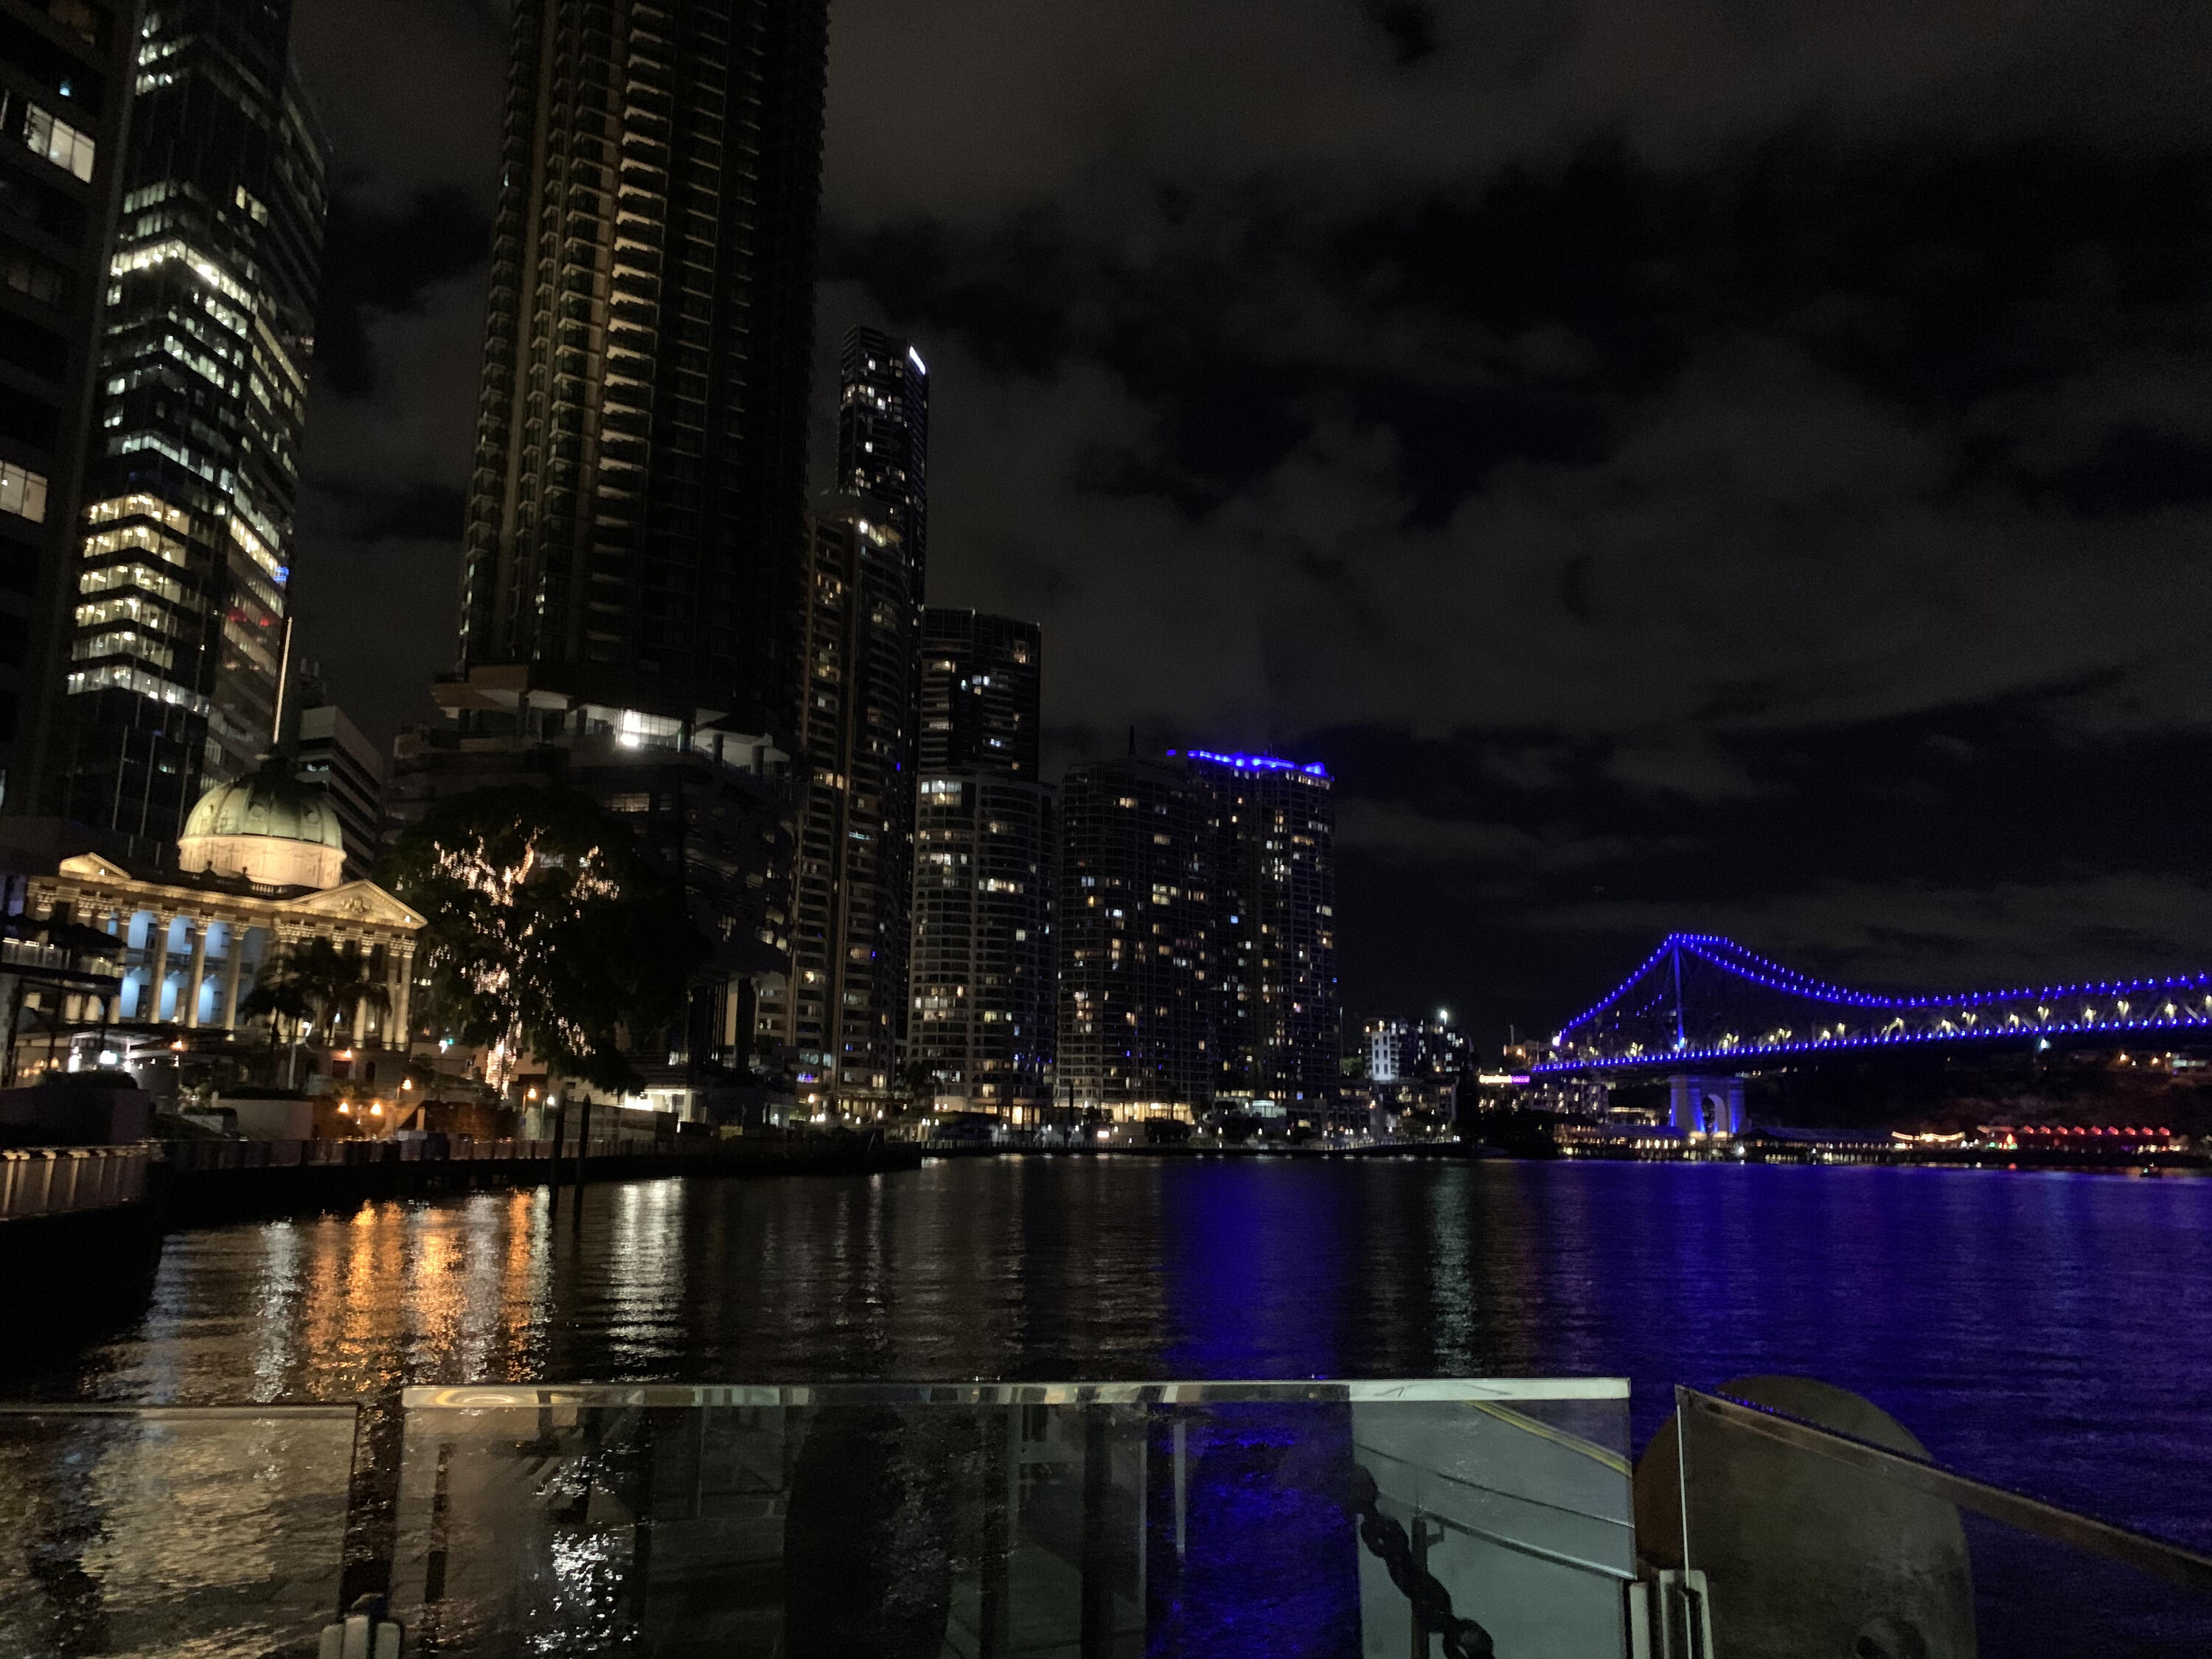 Nightime view of lit city highrises taken from on the water.